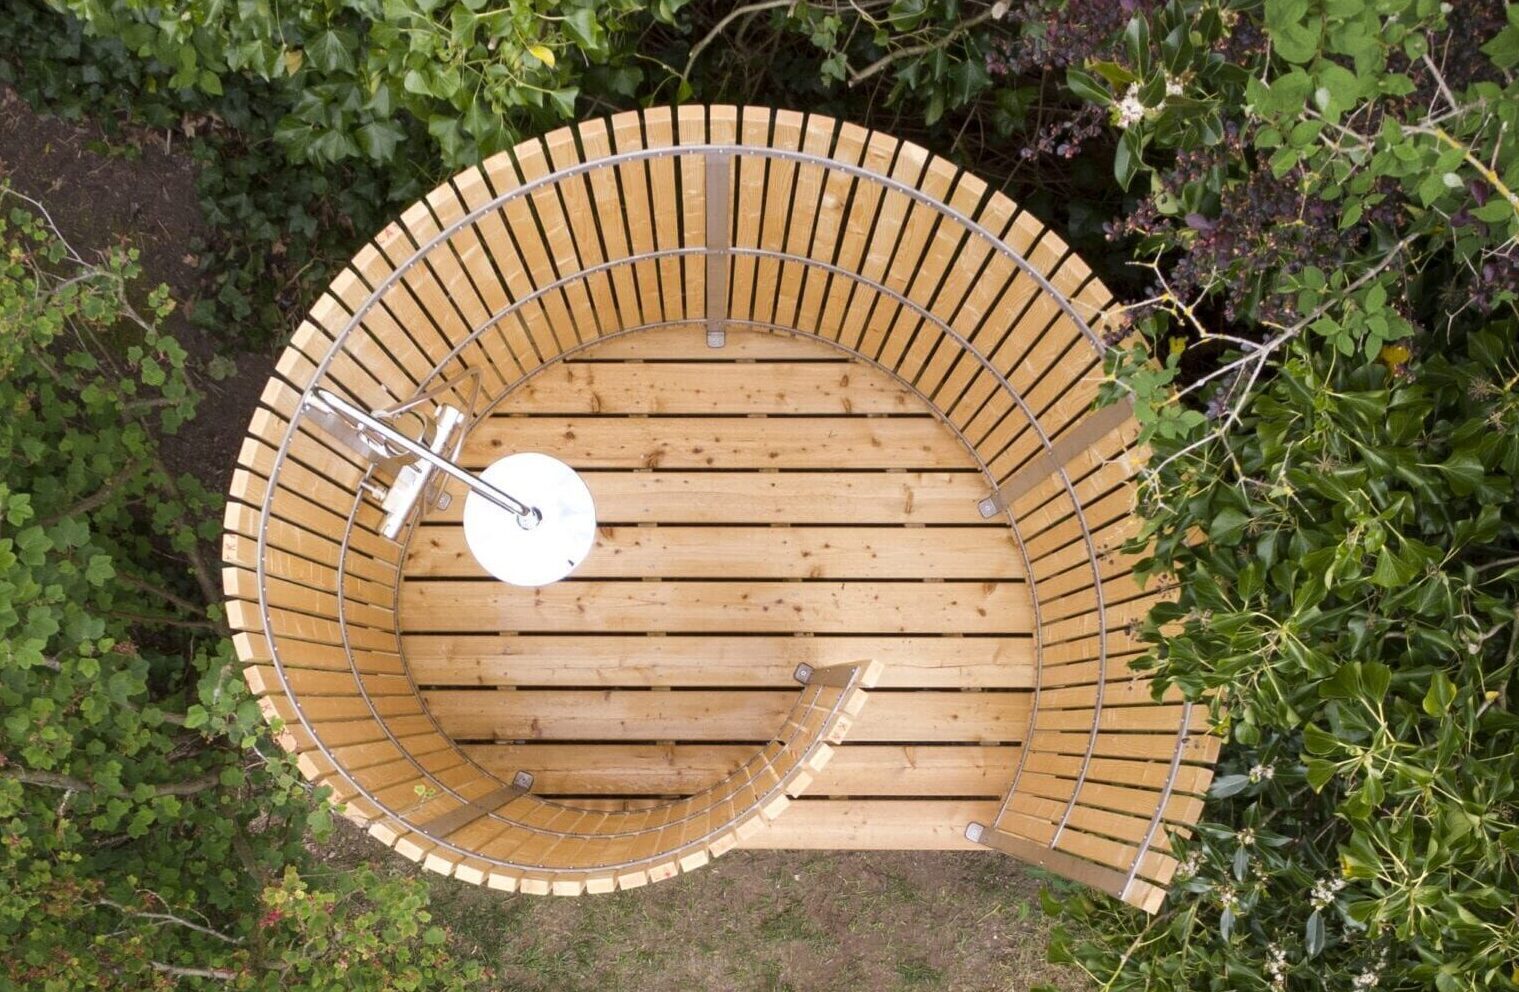 Nordic Seashell outdoor shower - drone photo taken from summer house on the South Sea Islands